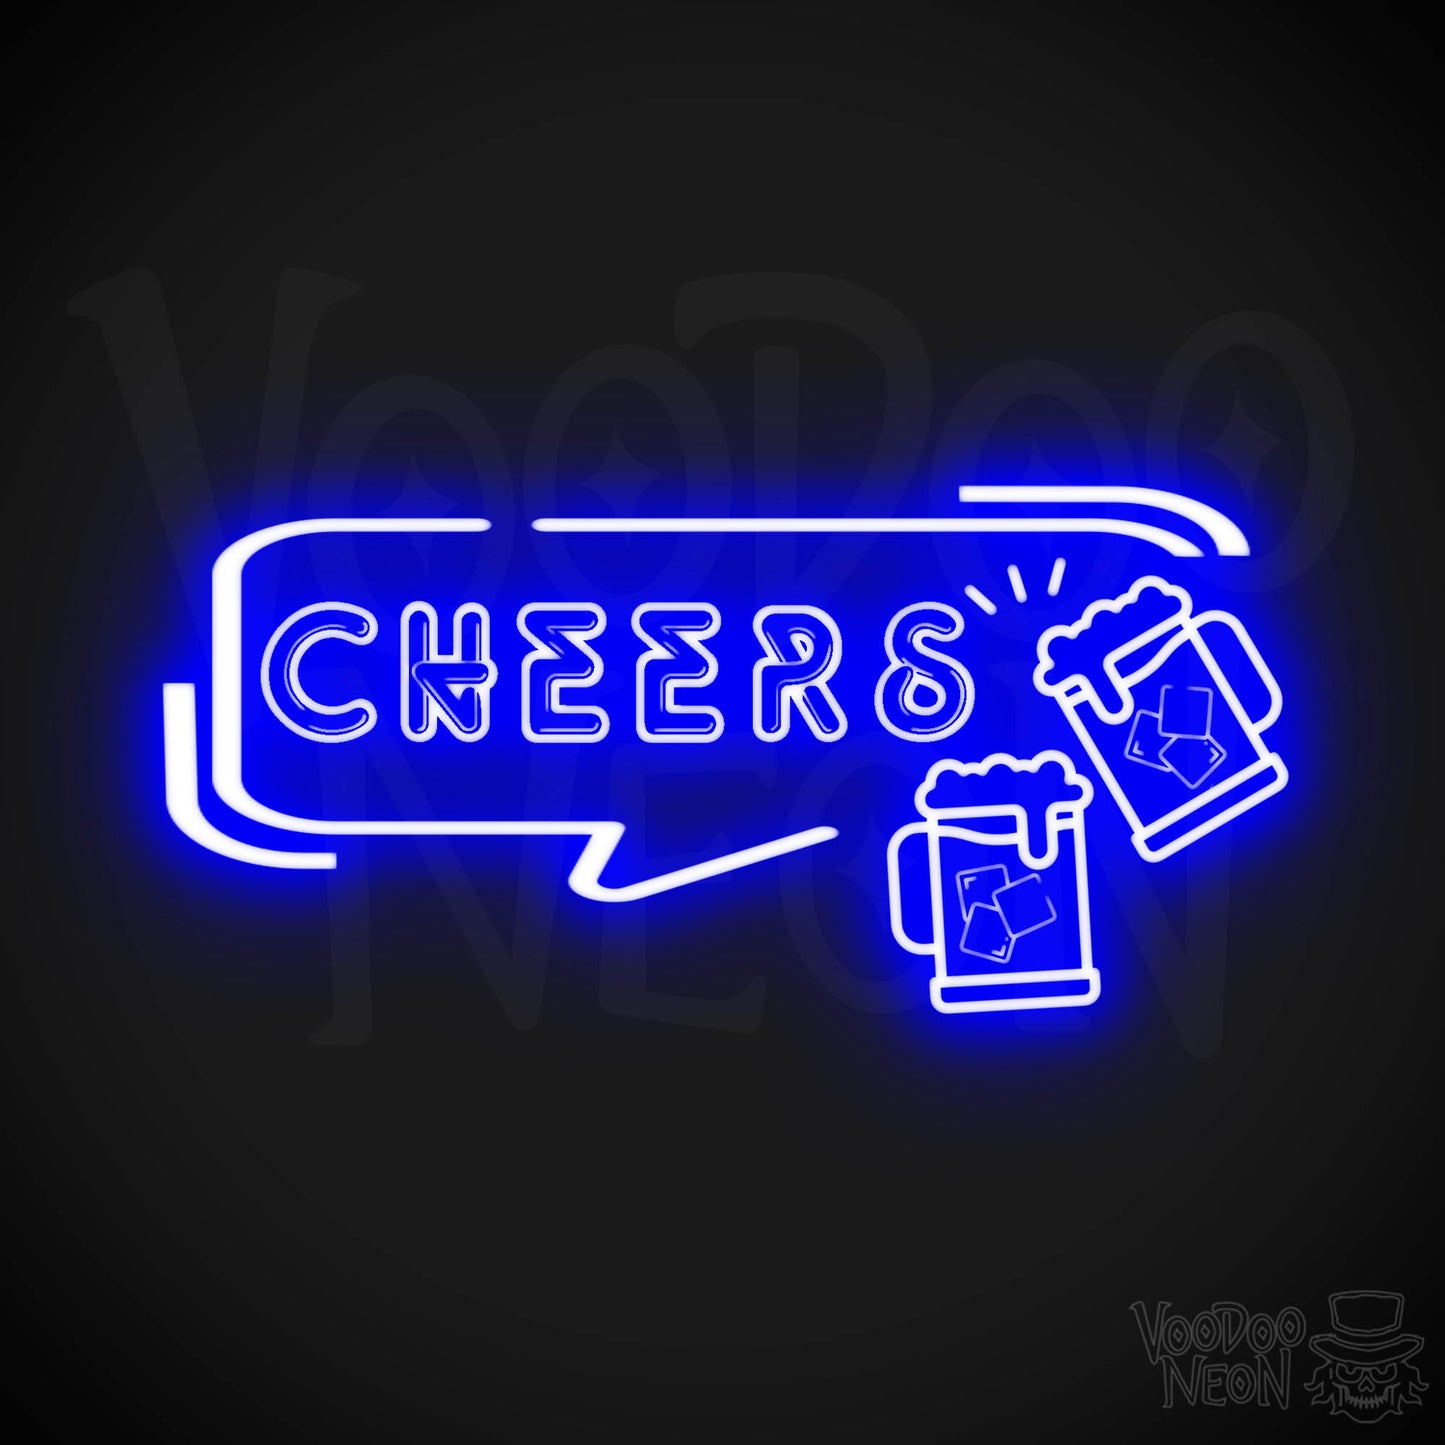 Cheers Neon Sign - Neon Cheers Bar Sign - LED Neon Wall Art - Color Dark Blue